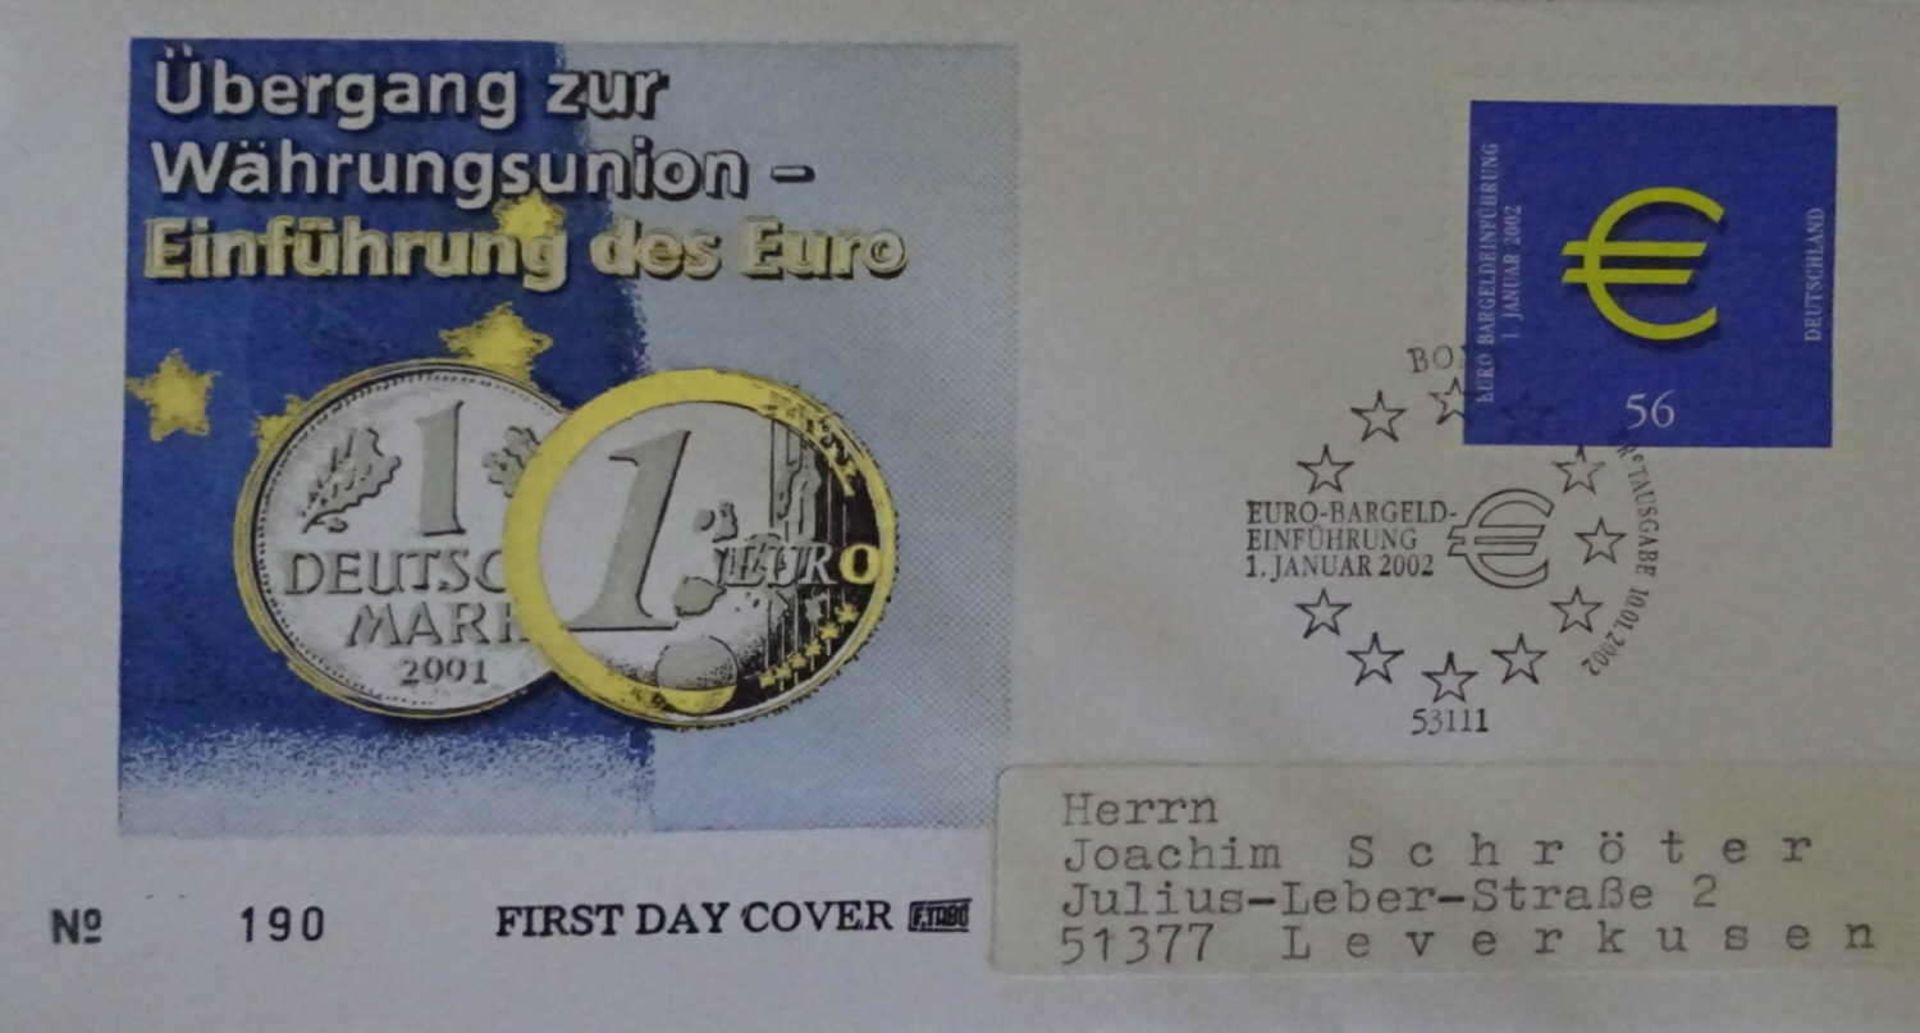 75 FDC BRD ab 2002 75 FDC Germany from 2002